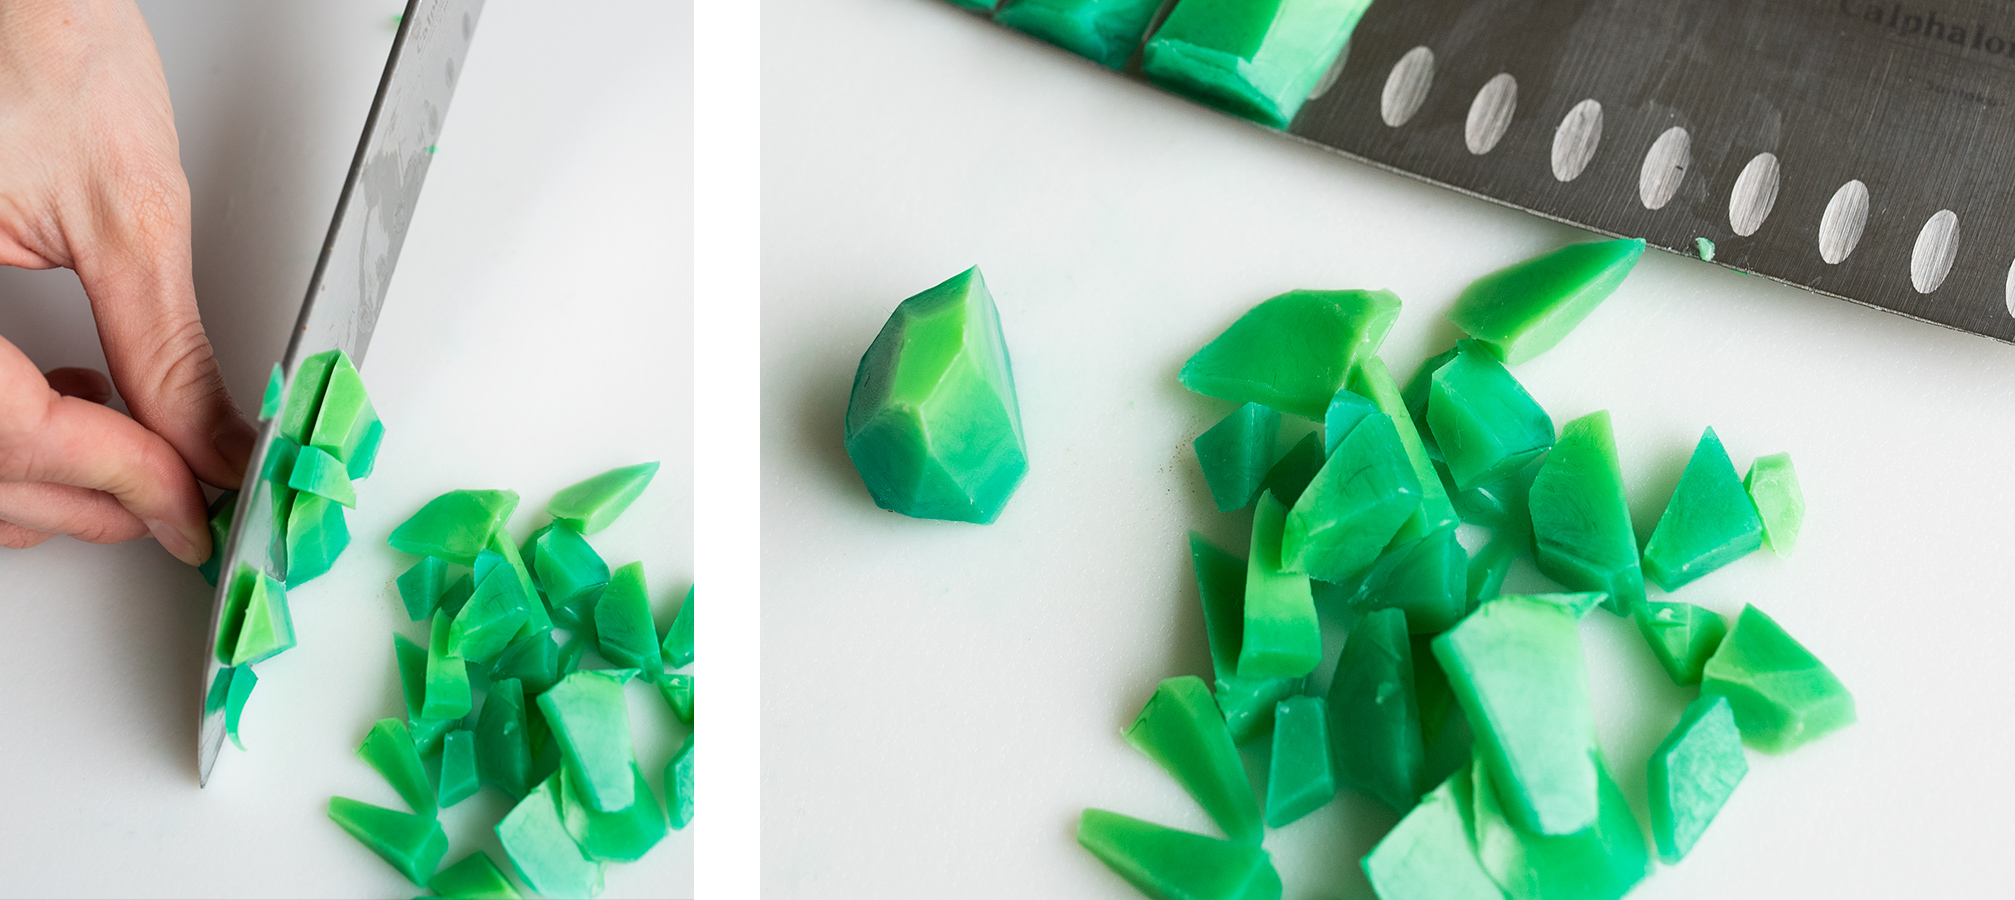 Cutting green melt and pour soap into small pieces